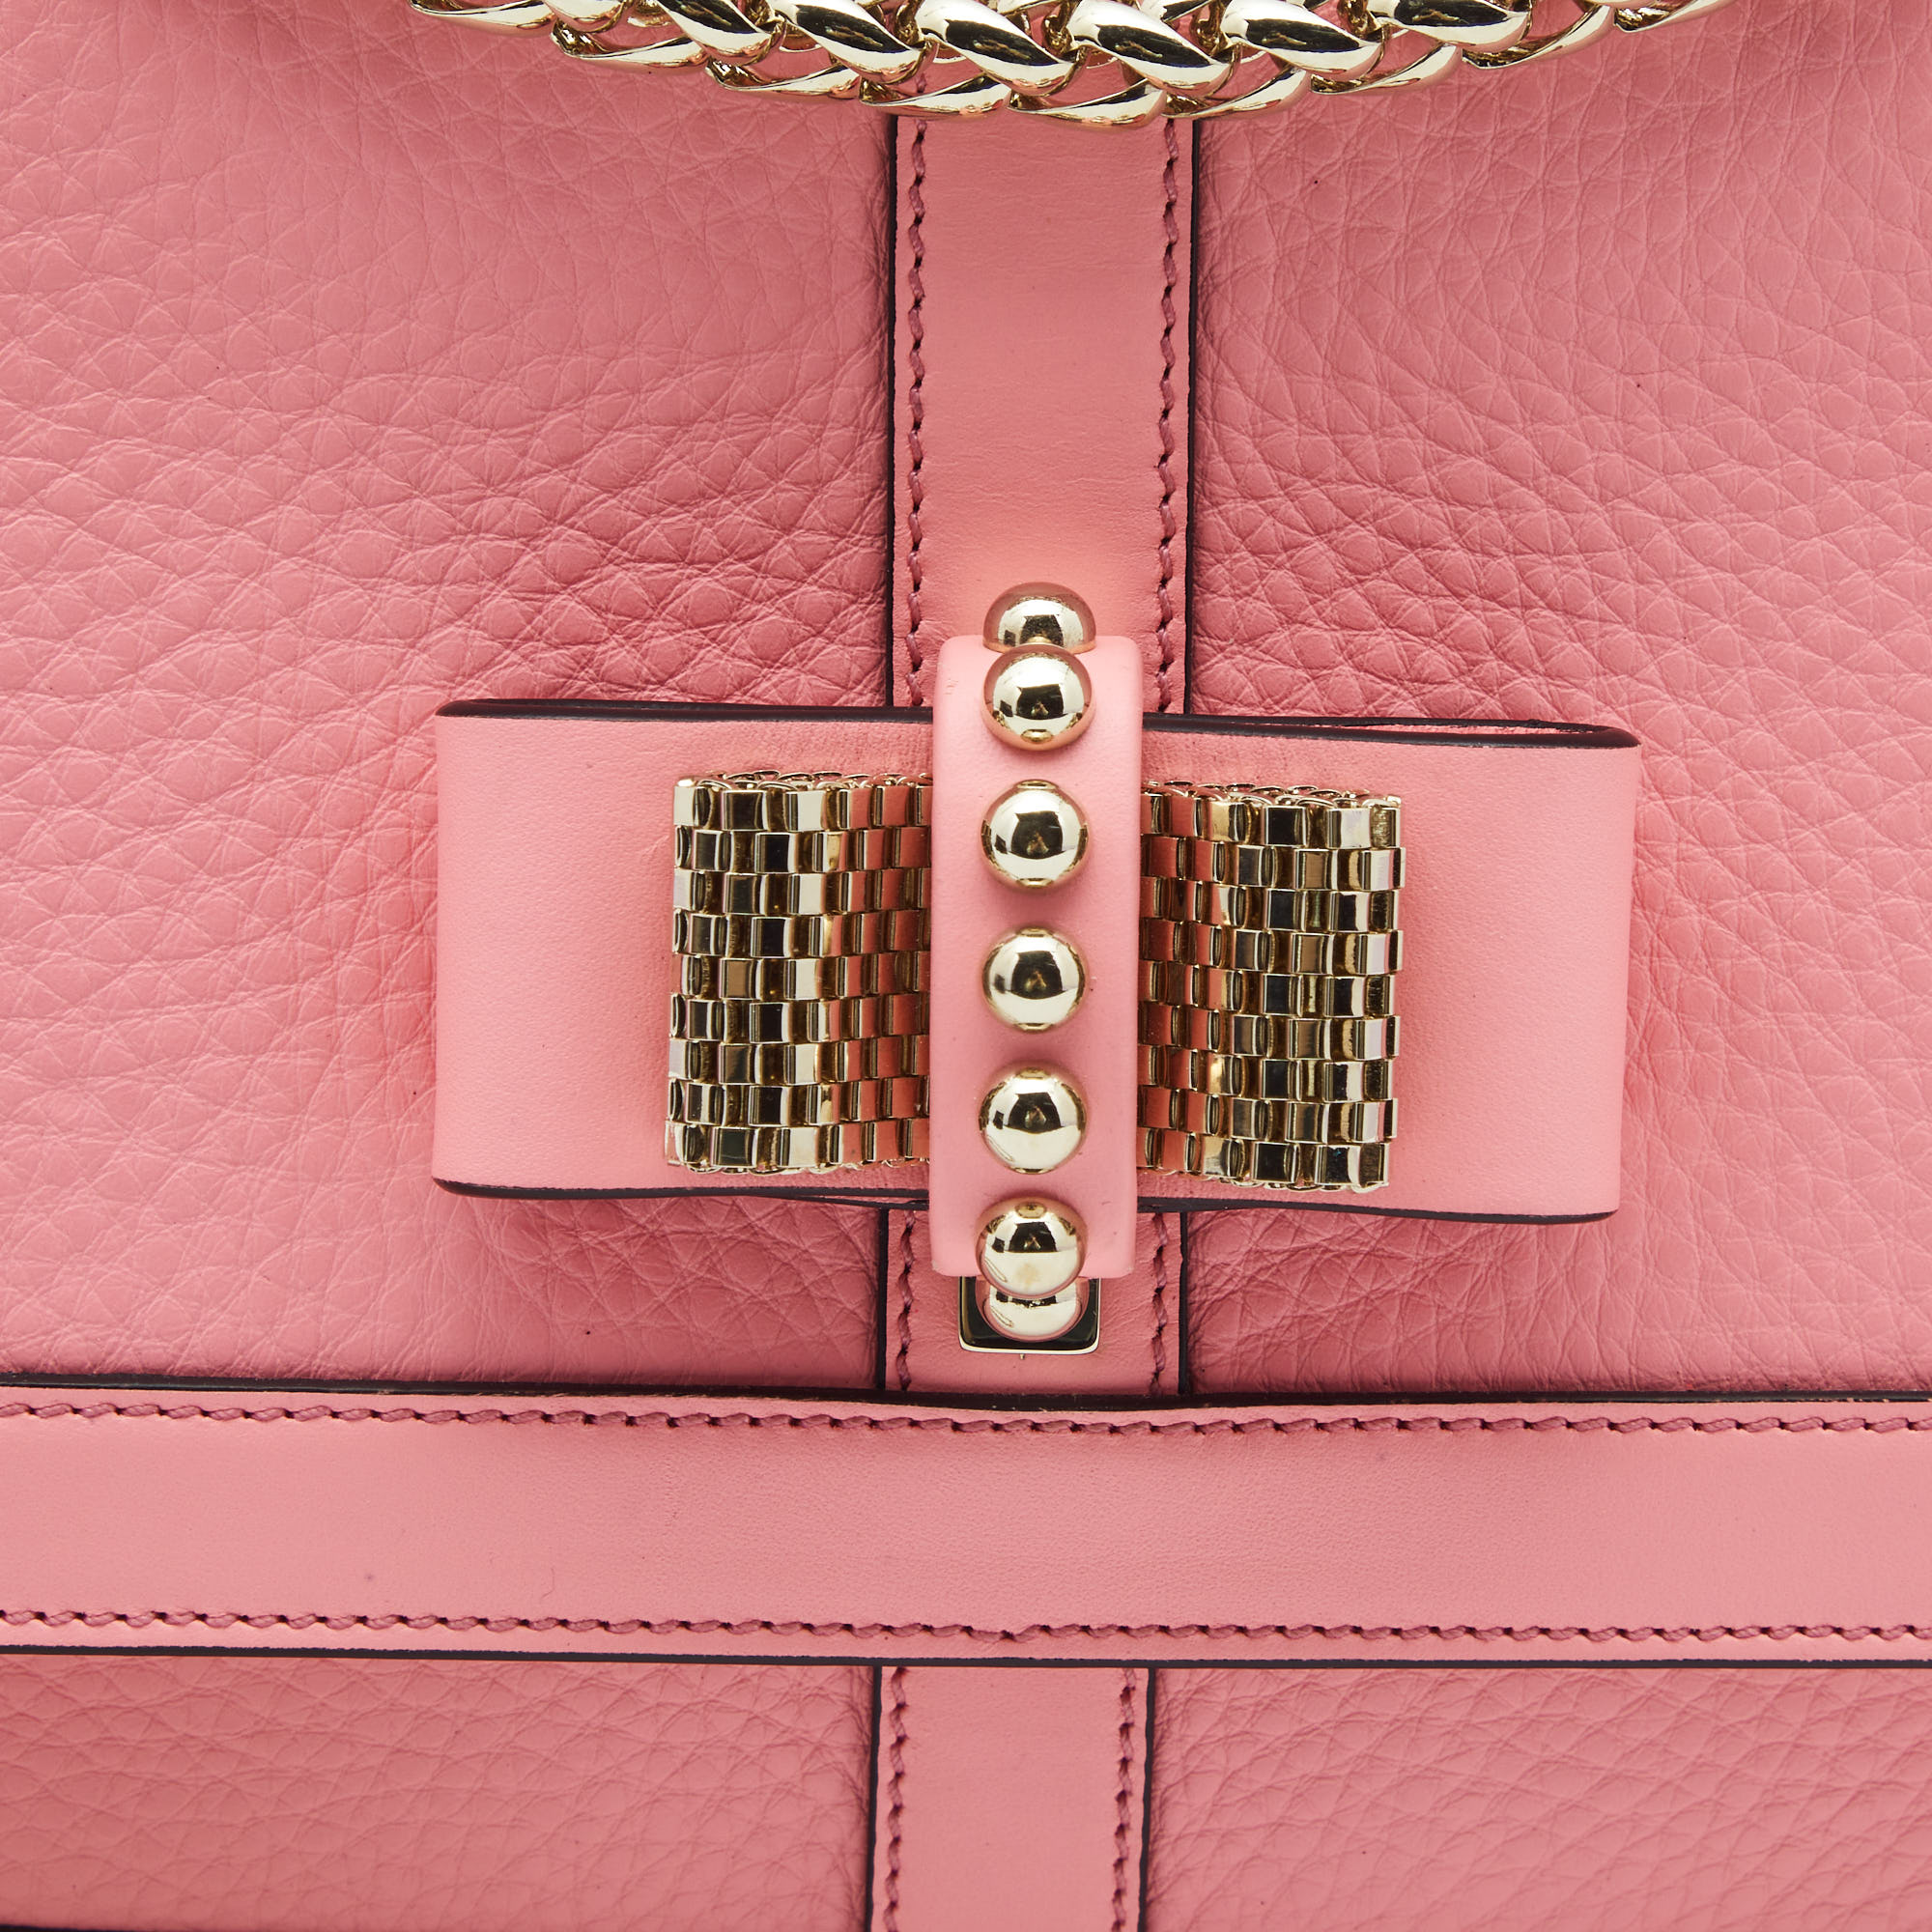 Christian Louboutin Pink Leather Sweet Charity Shoulder Bag